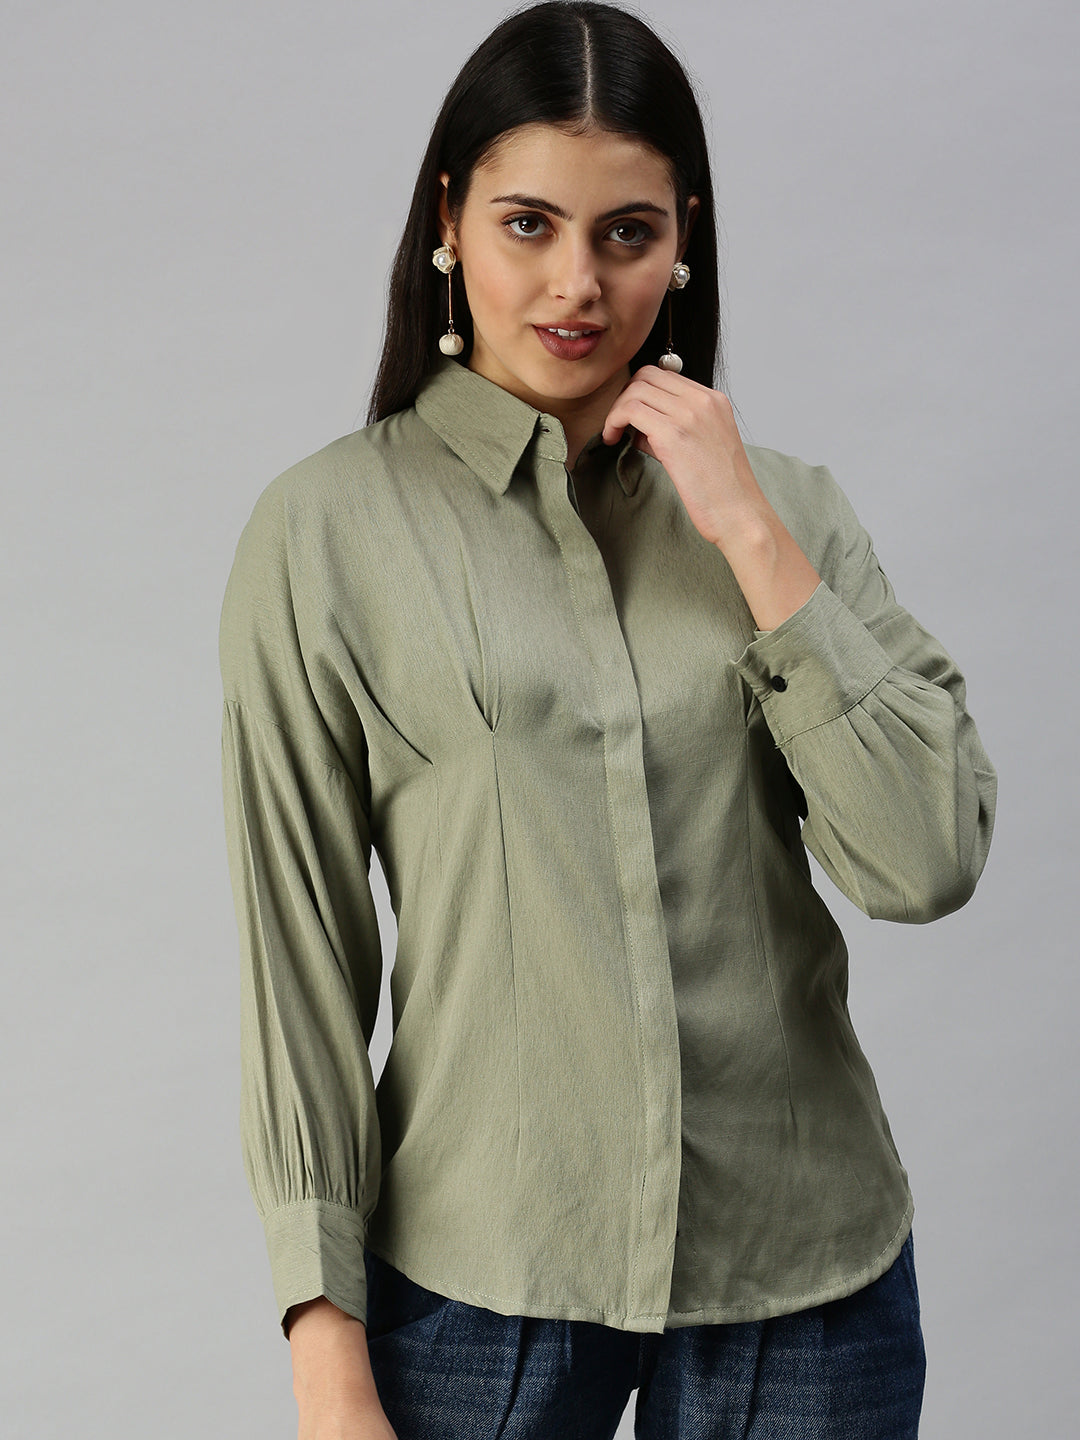 Women's Olive Solid Shirt